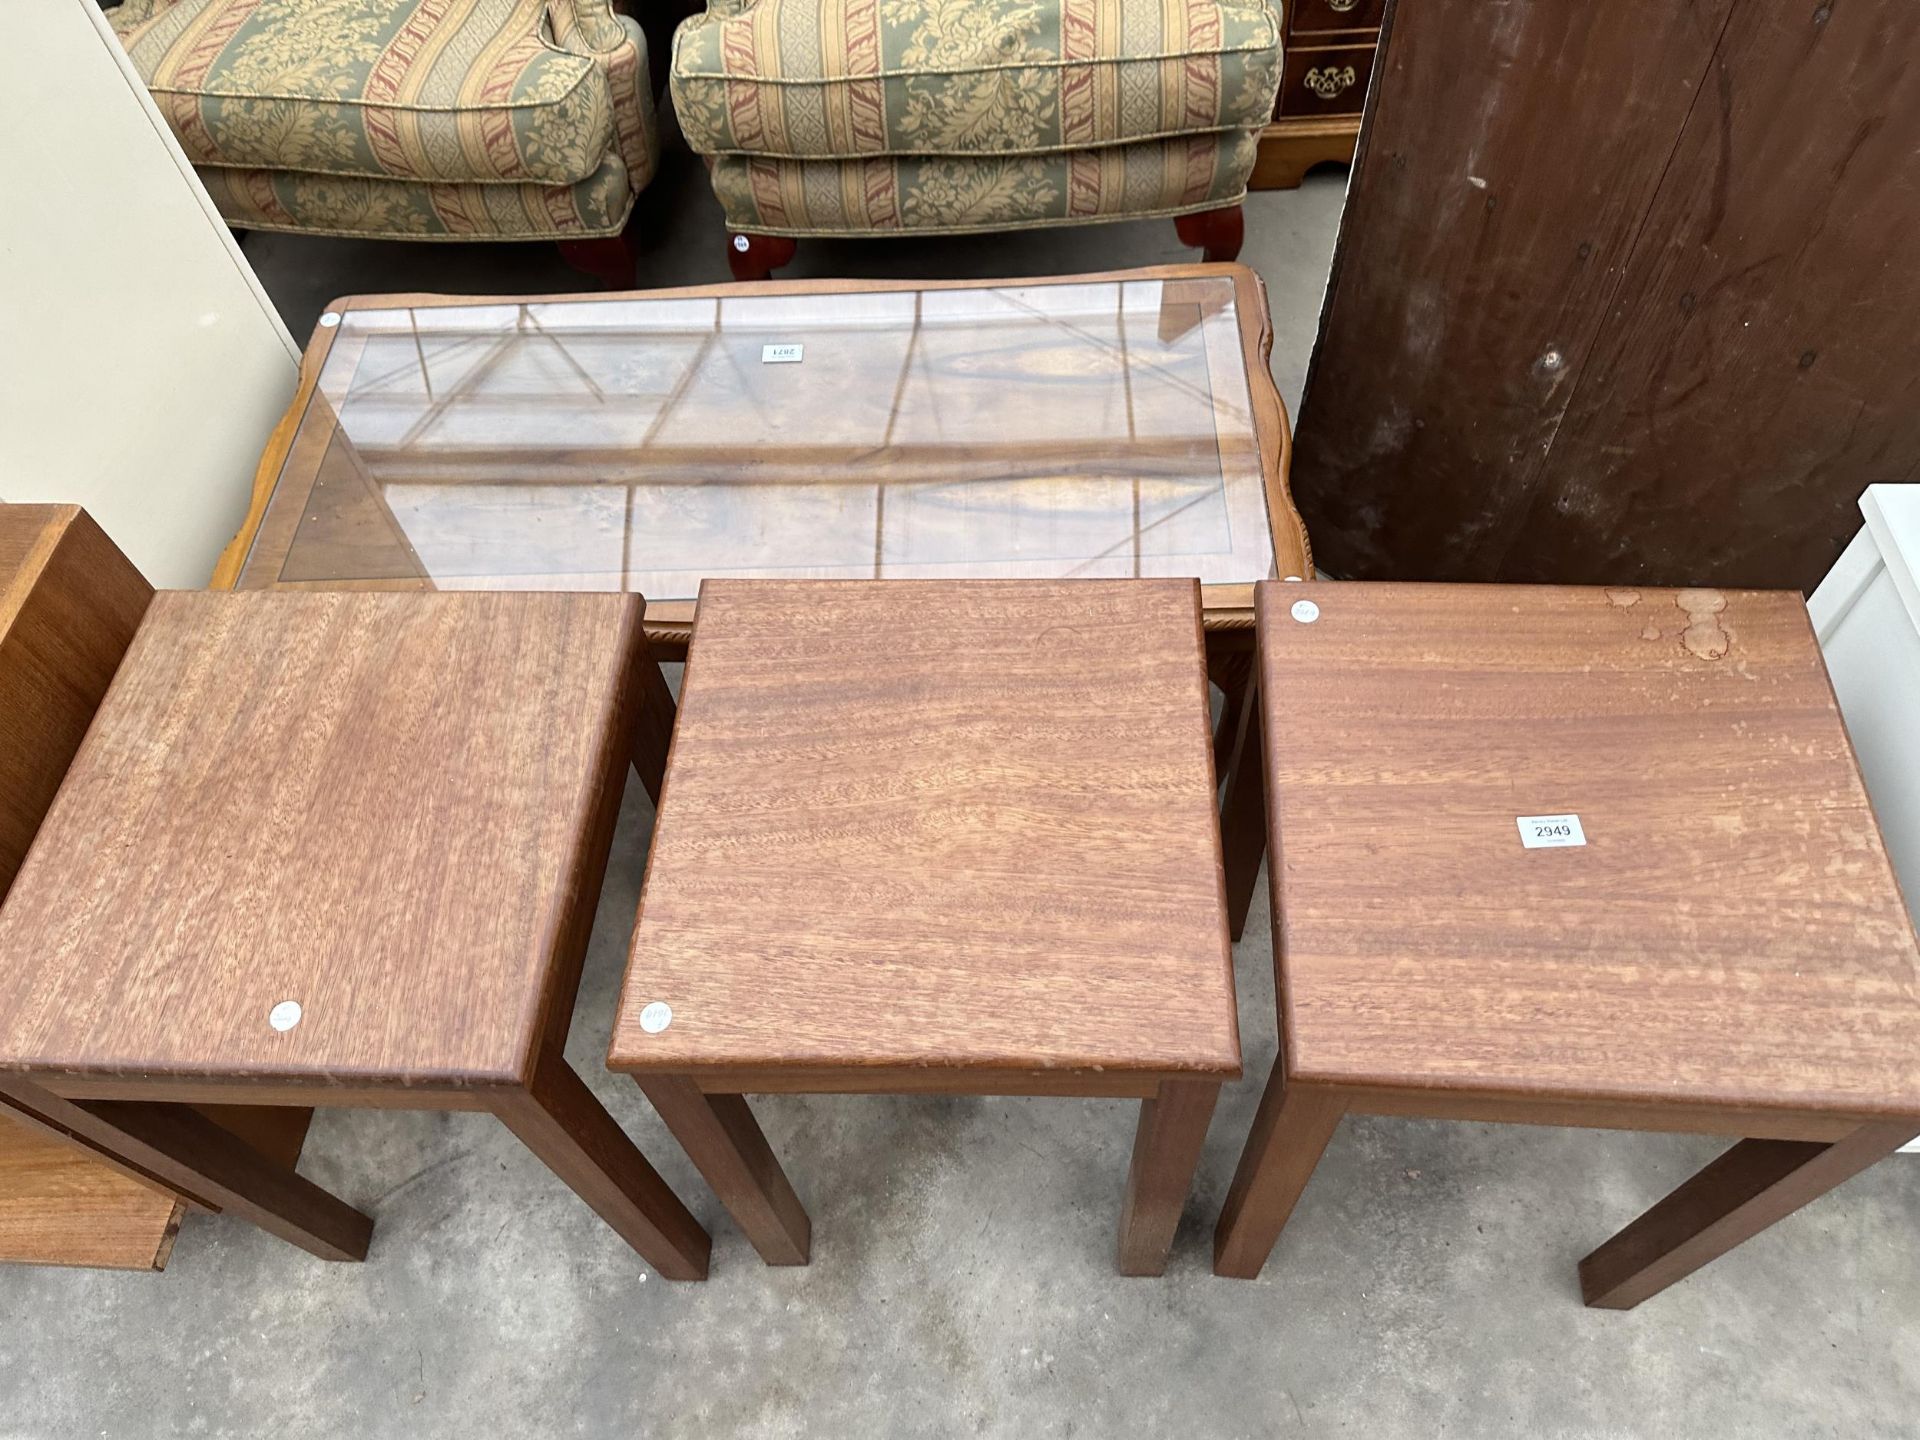 THREE MODERN HARDWOOD LAMP TABLES, 15" SQUARE EACH - Image 2 of 3